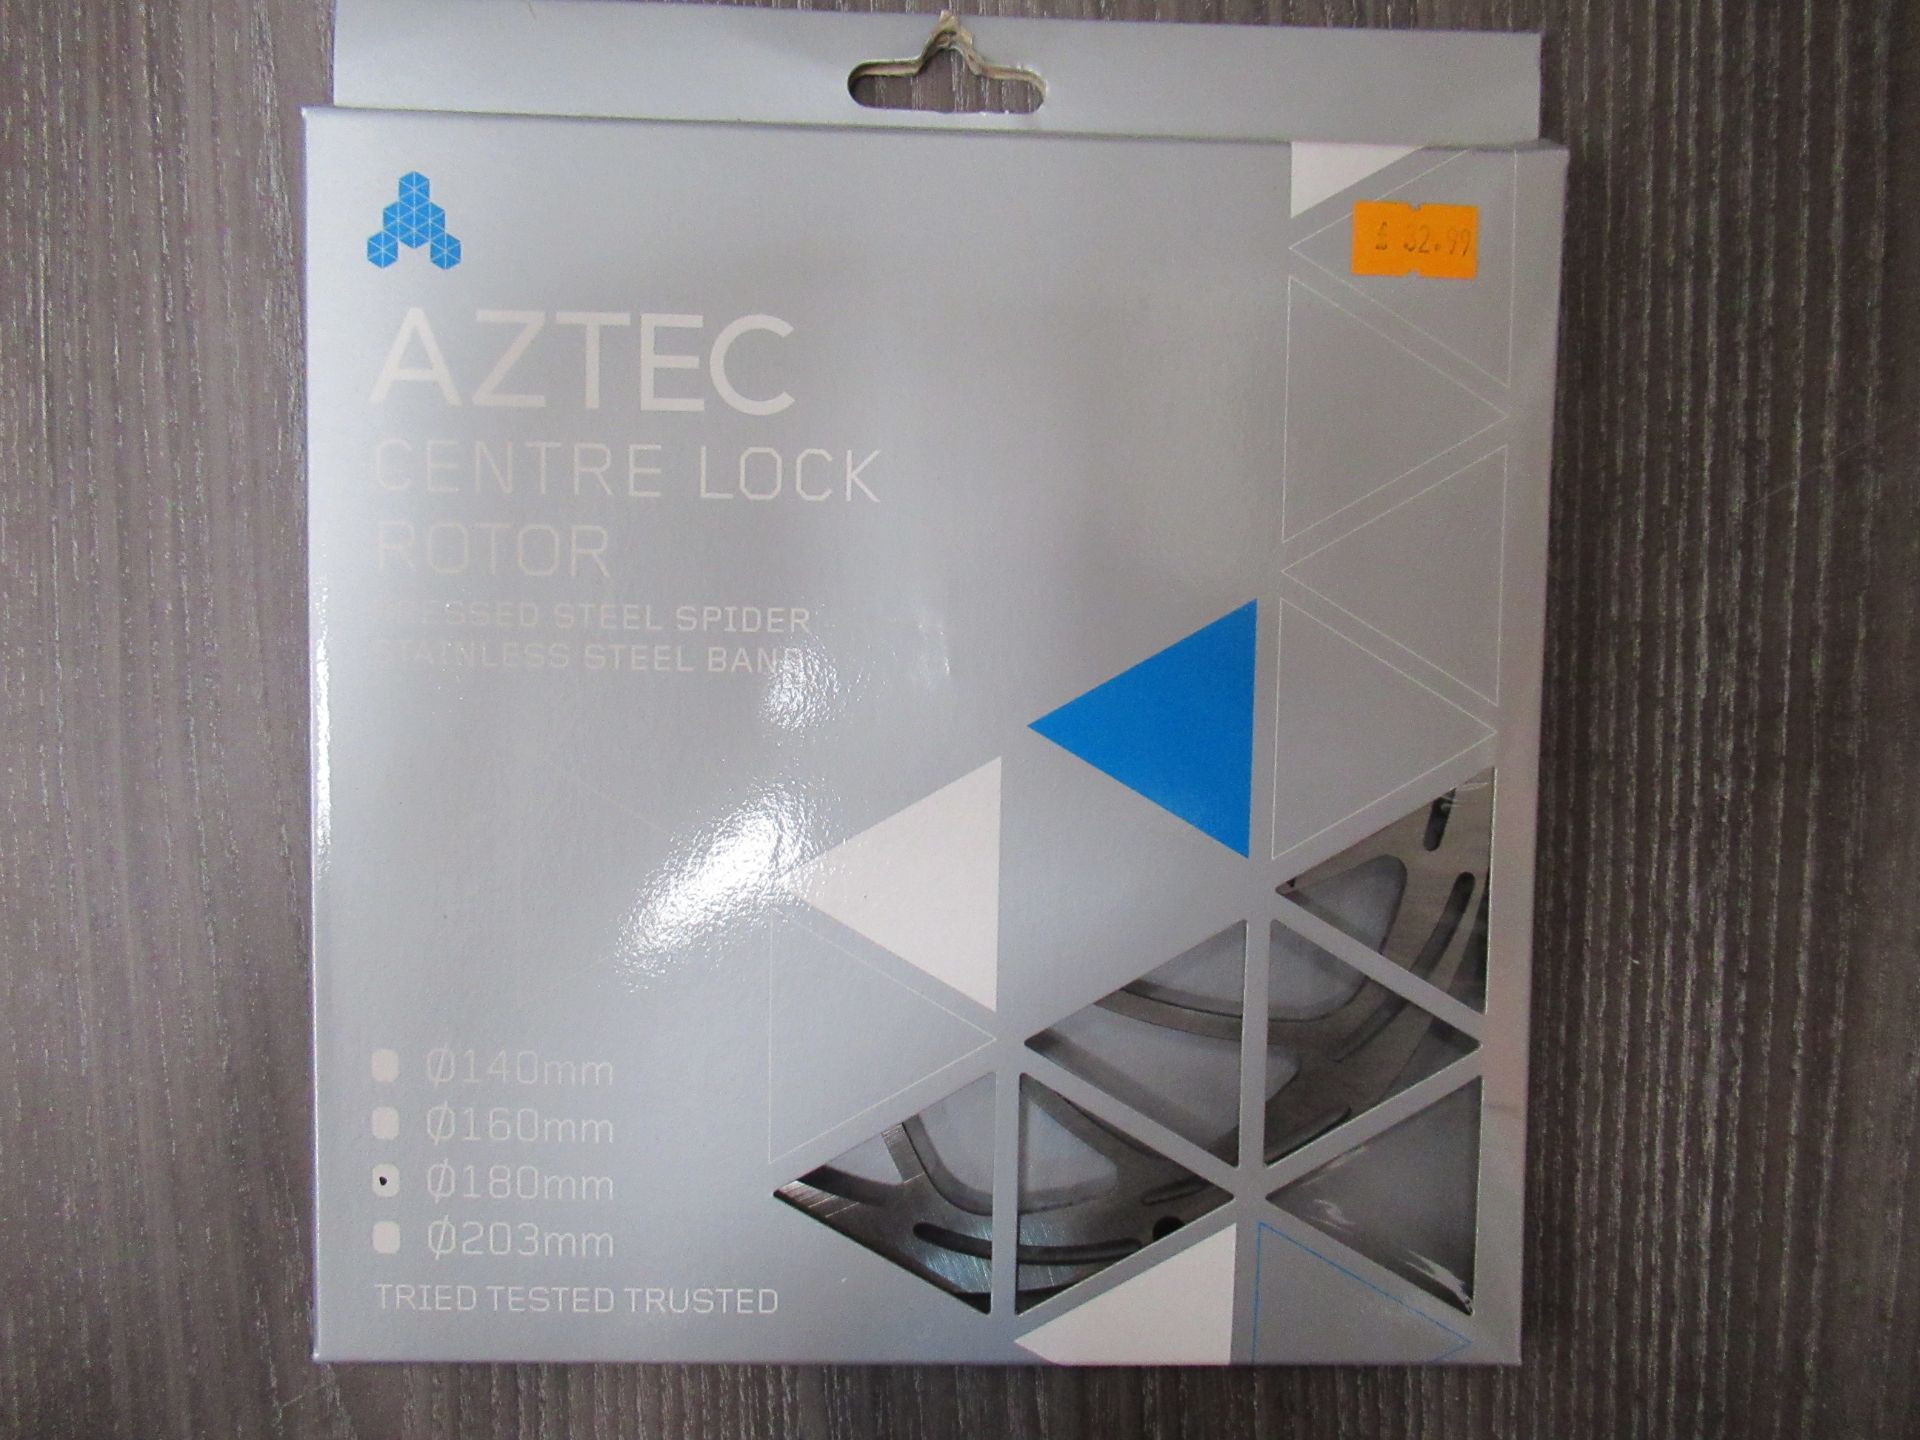 6 x Aztec Centre Lock Rotor's: 2 x 160mm (RRP£28.99 each); 3 x 180mm (RRP£32.99) and 1 x 203mm (RRP£ - Image 6 of 13